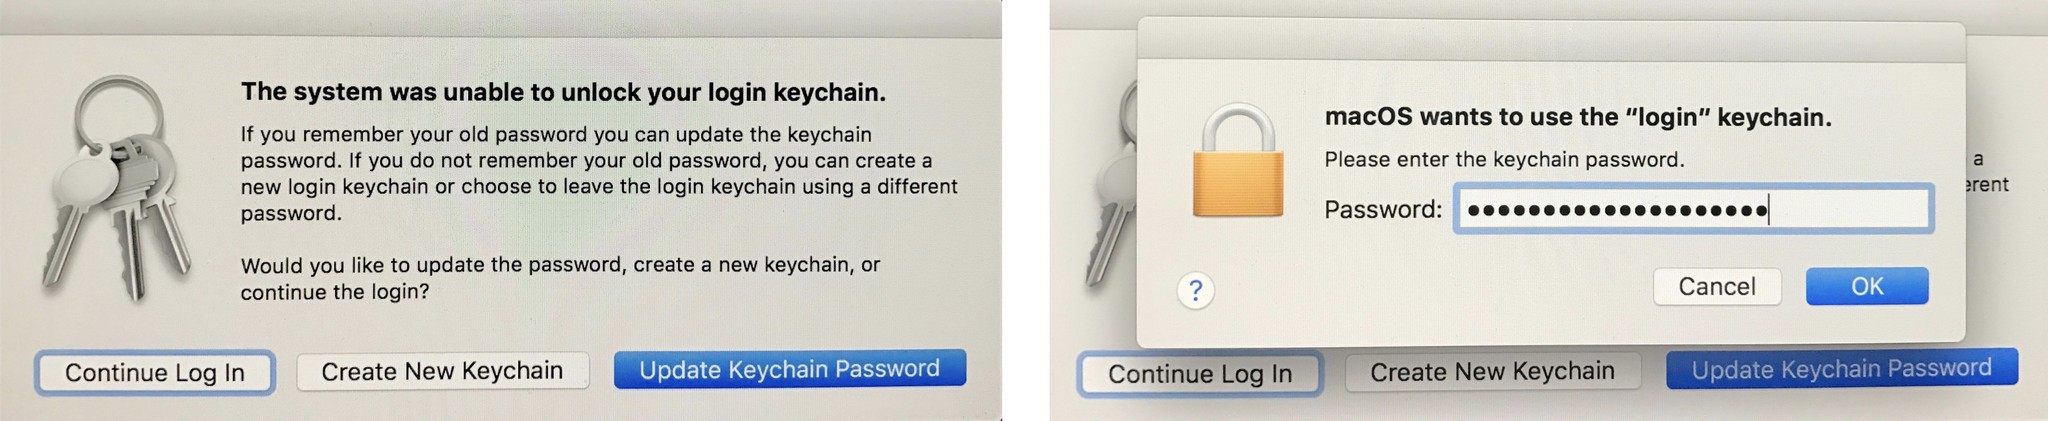 When prompted, click Continue Log In, Create New Keychain, or Update Keychain Password 